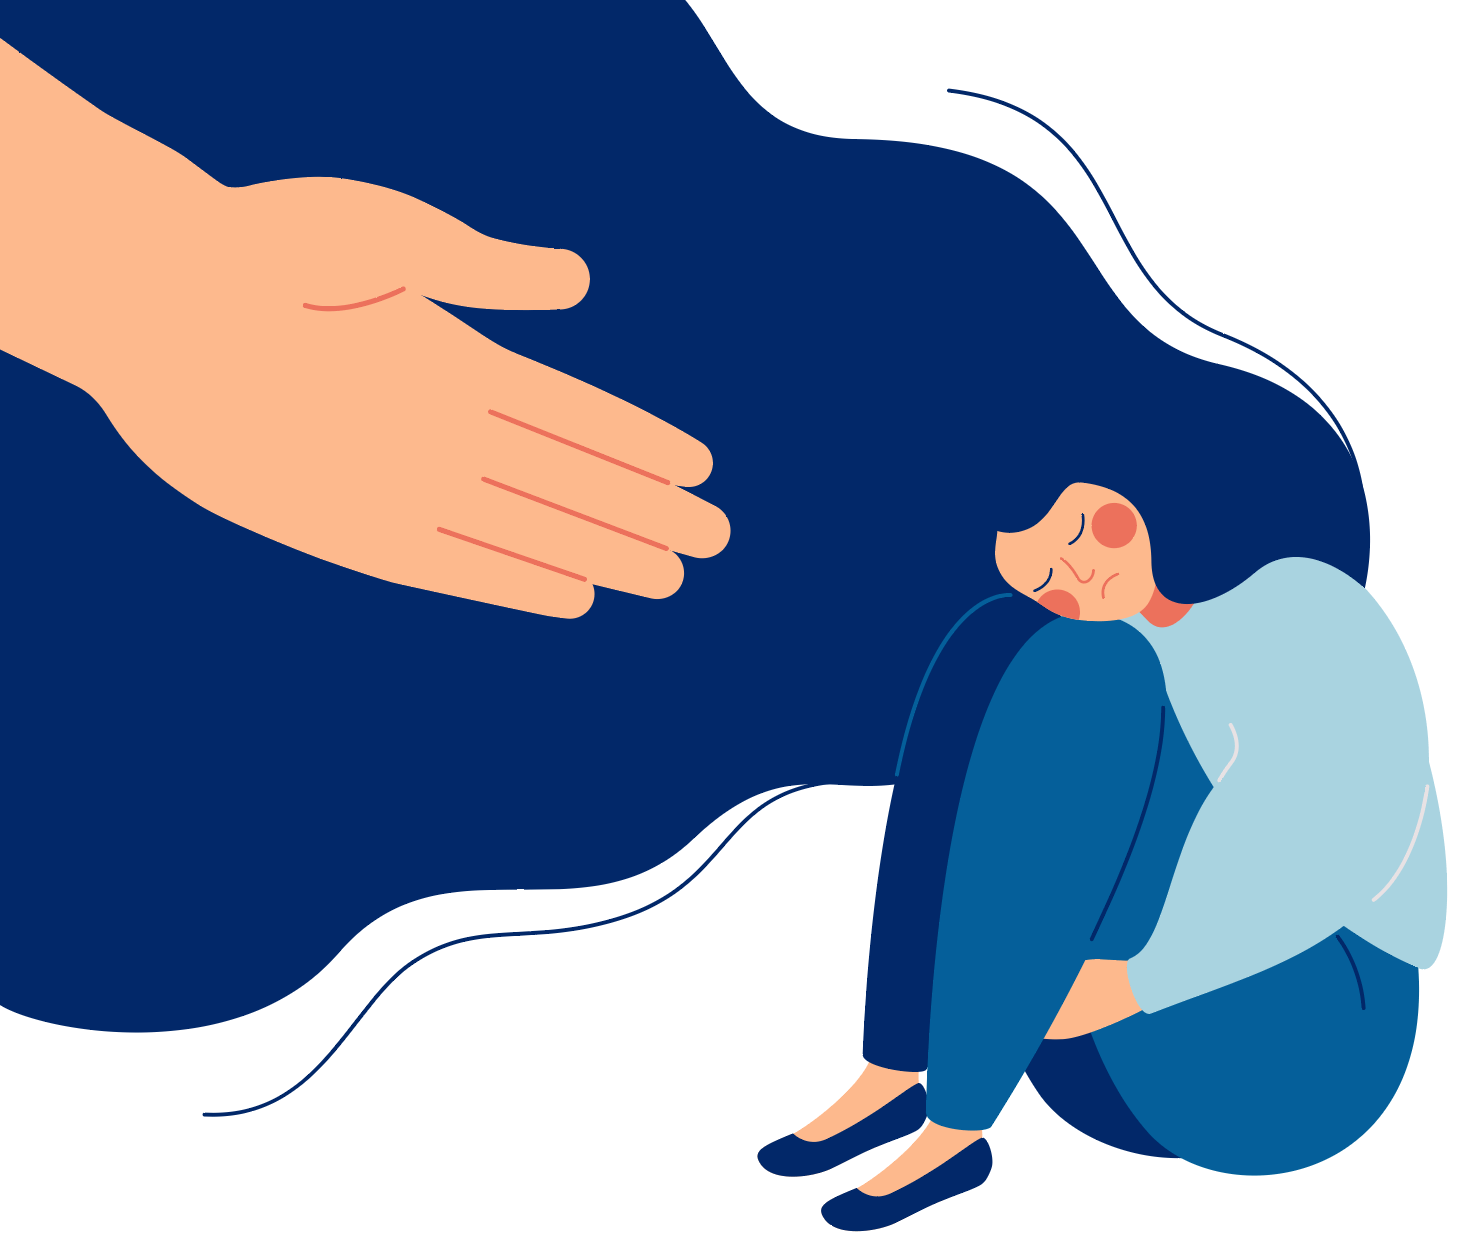 A woman curled up with a hand reaching out to her to help.